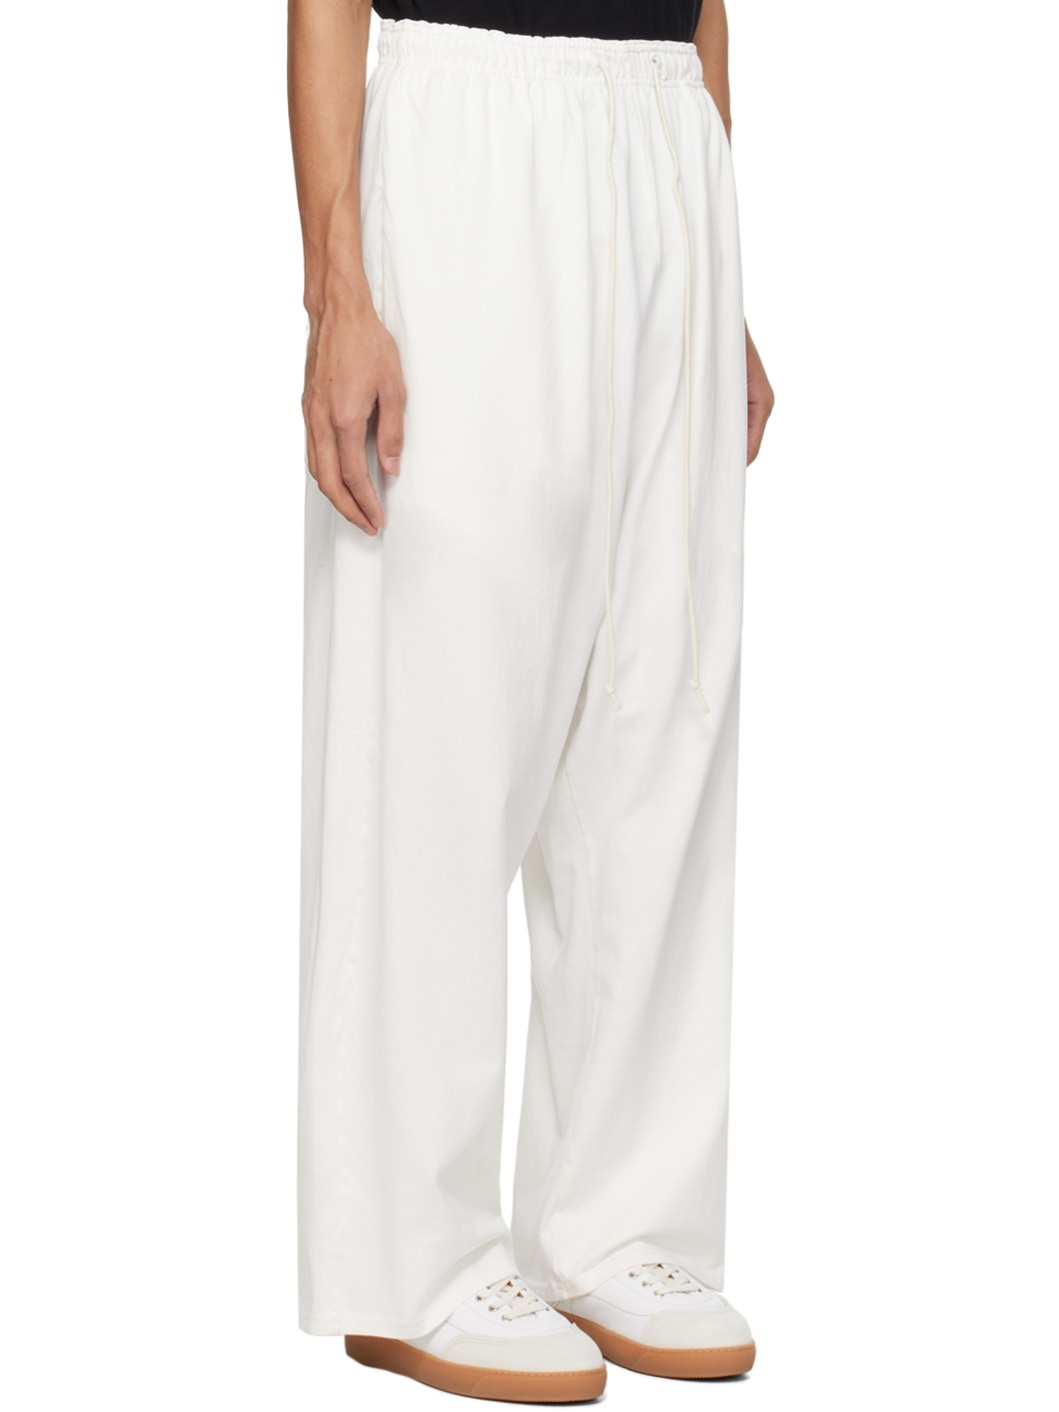 White Embroidered Sweatpants - 2